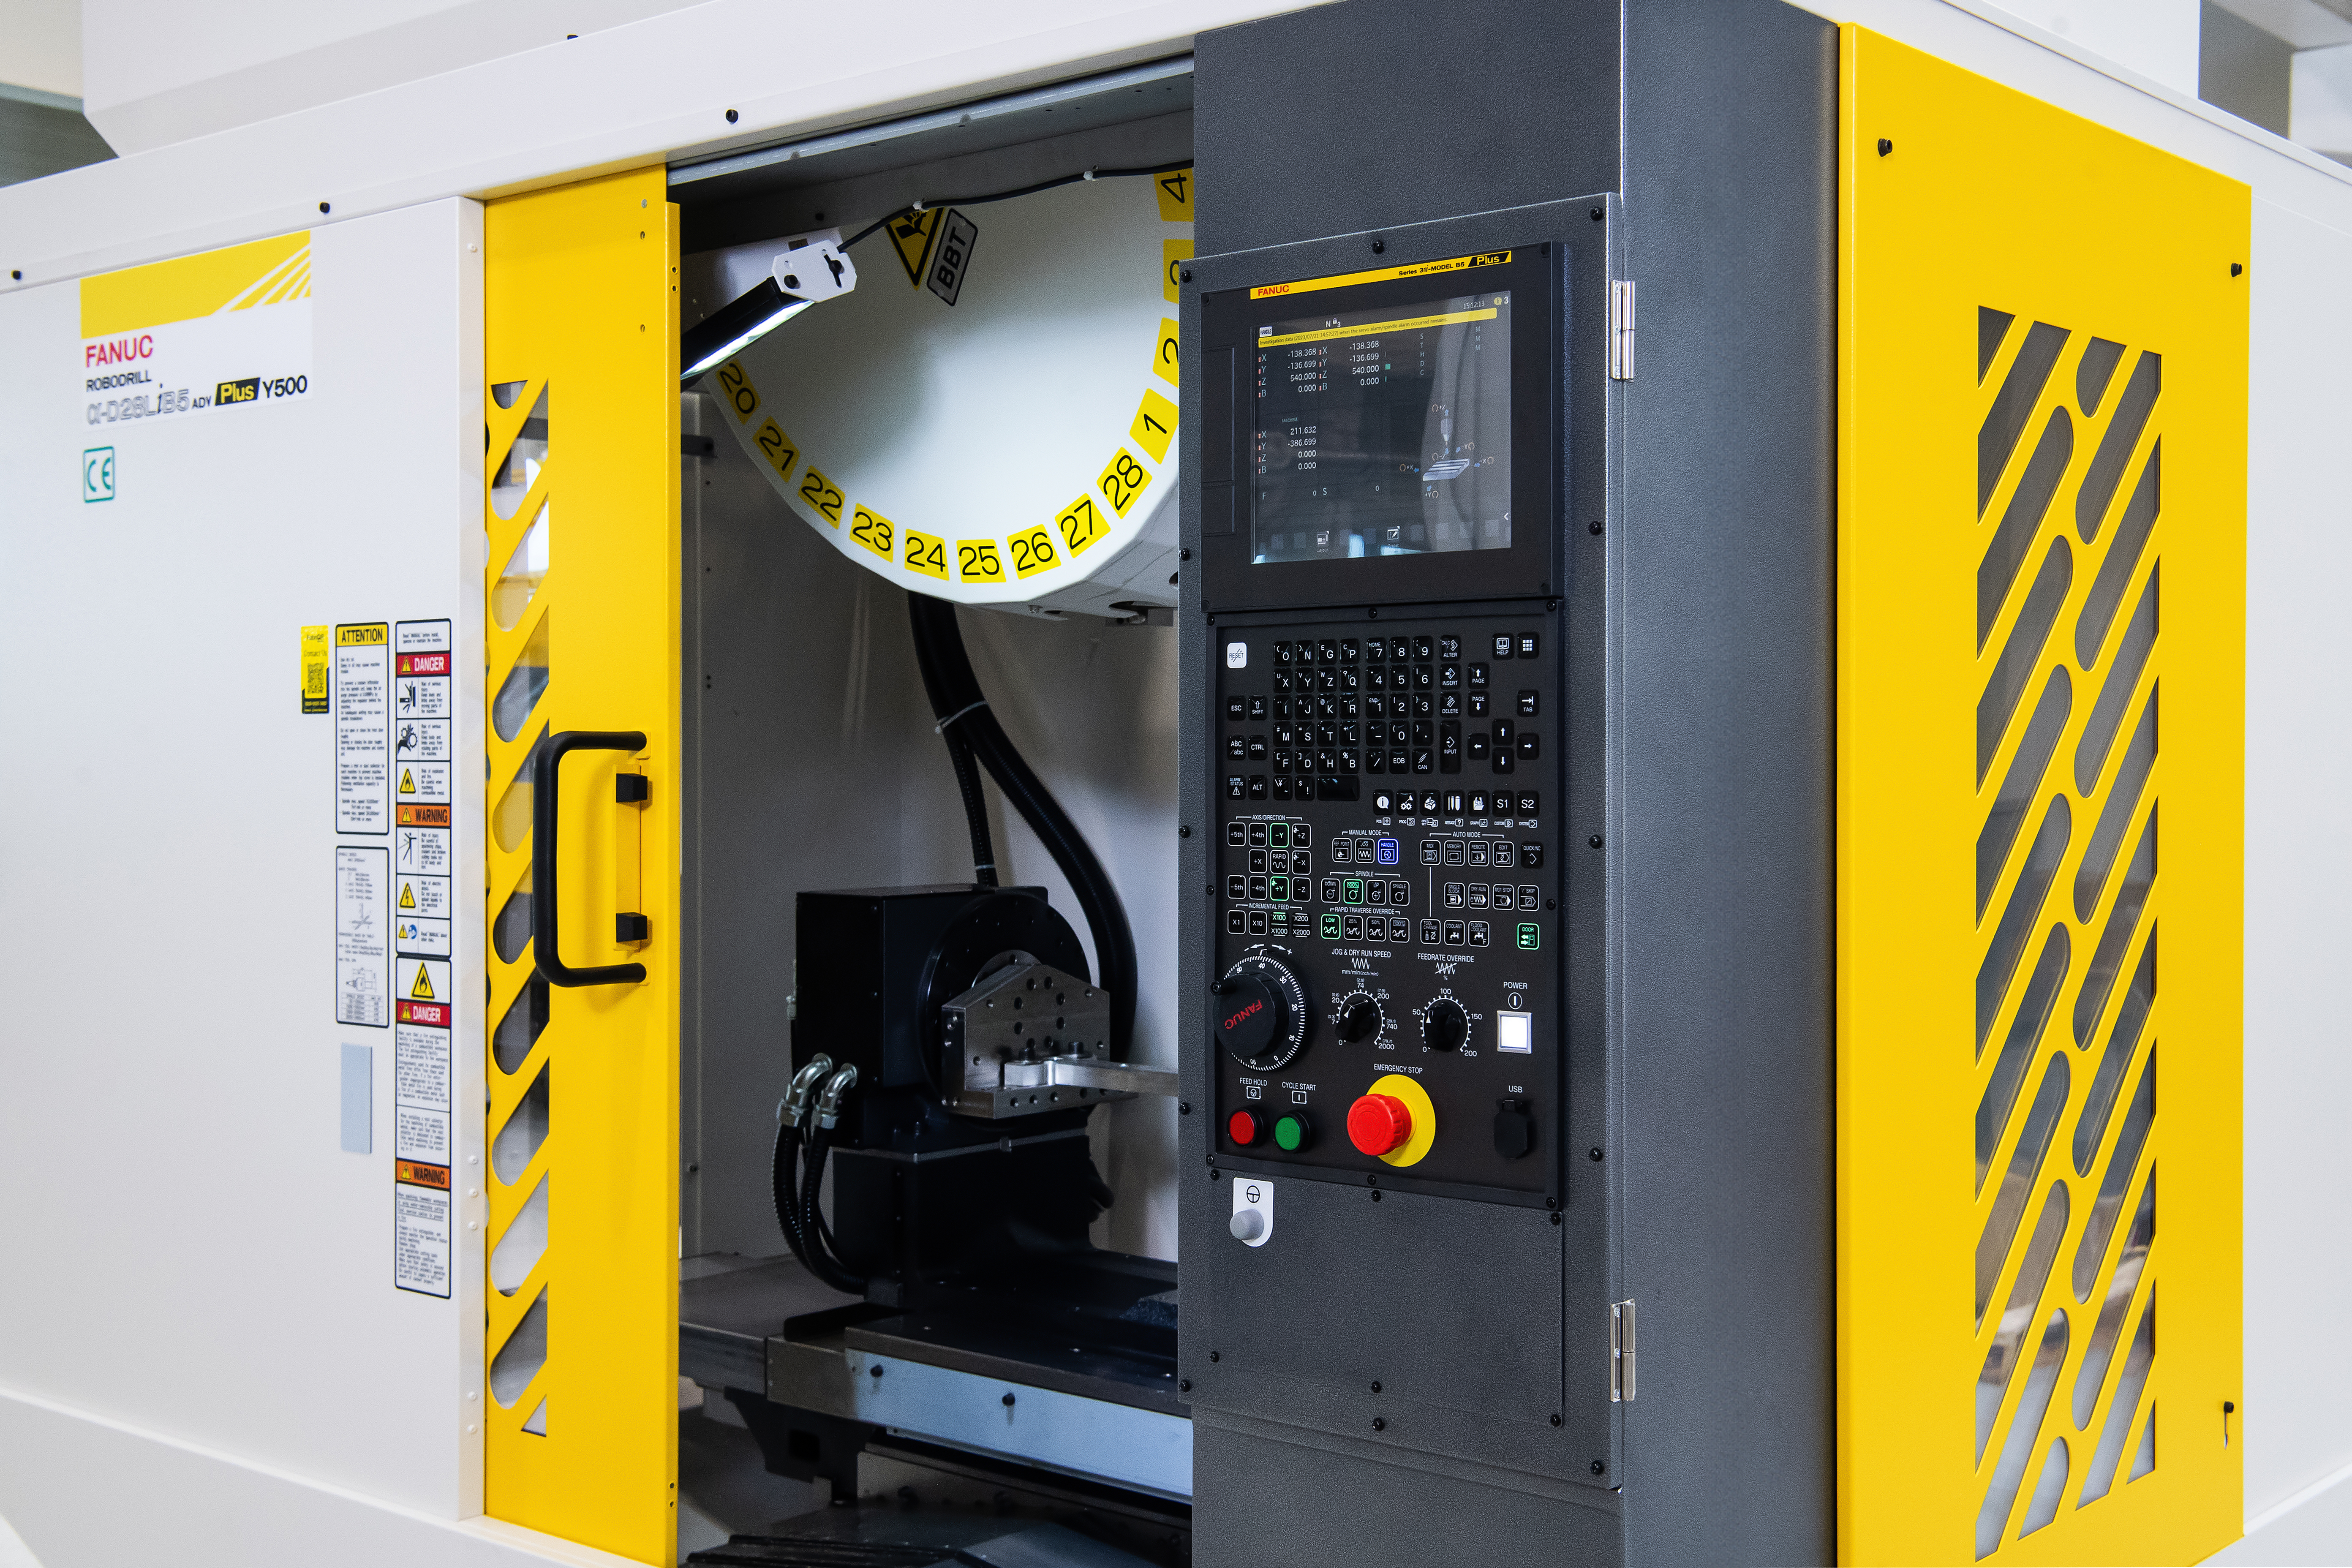 New FANUC CNC system, machine tools and robots at EMO Hannover